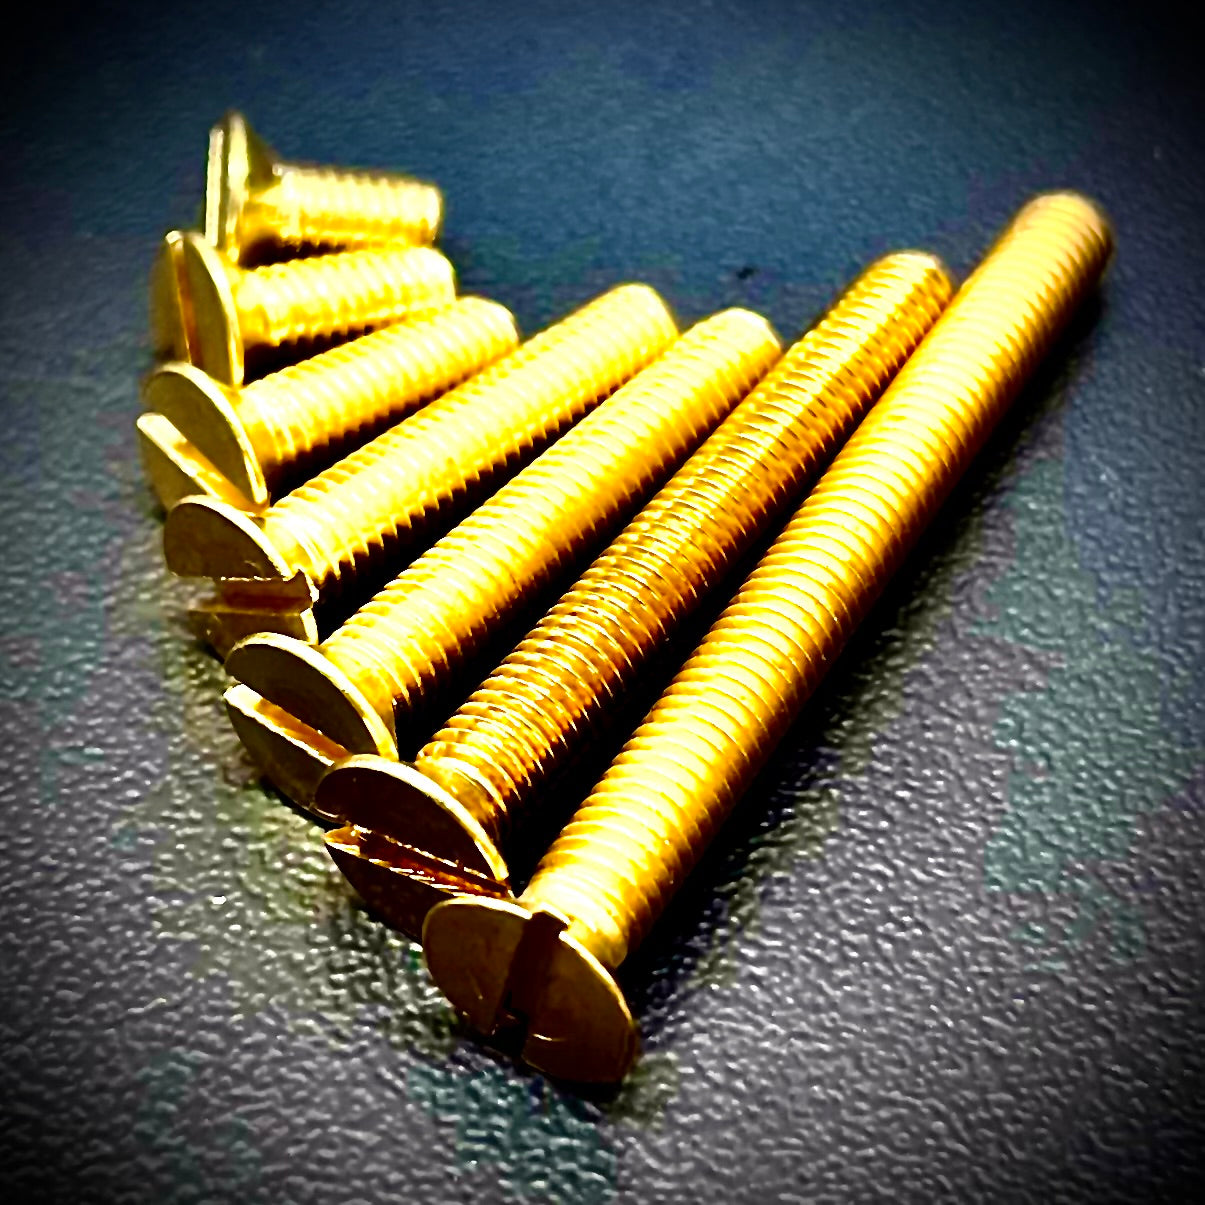 M12 x 25mm Machine Screws Slotted Countersunk Brass DIN 963 - Fixaball Ltd. Fixings and Fasteners UK